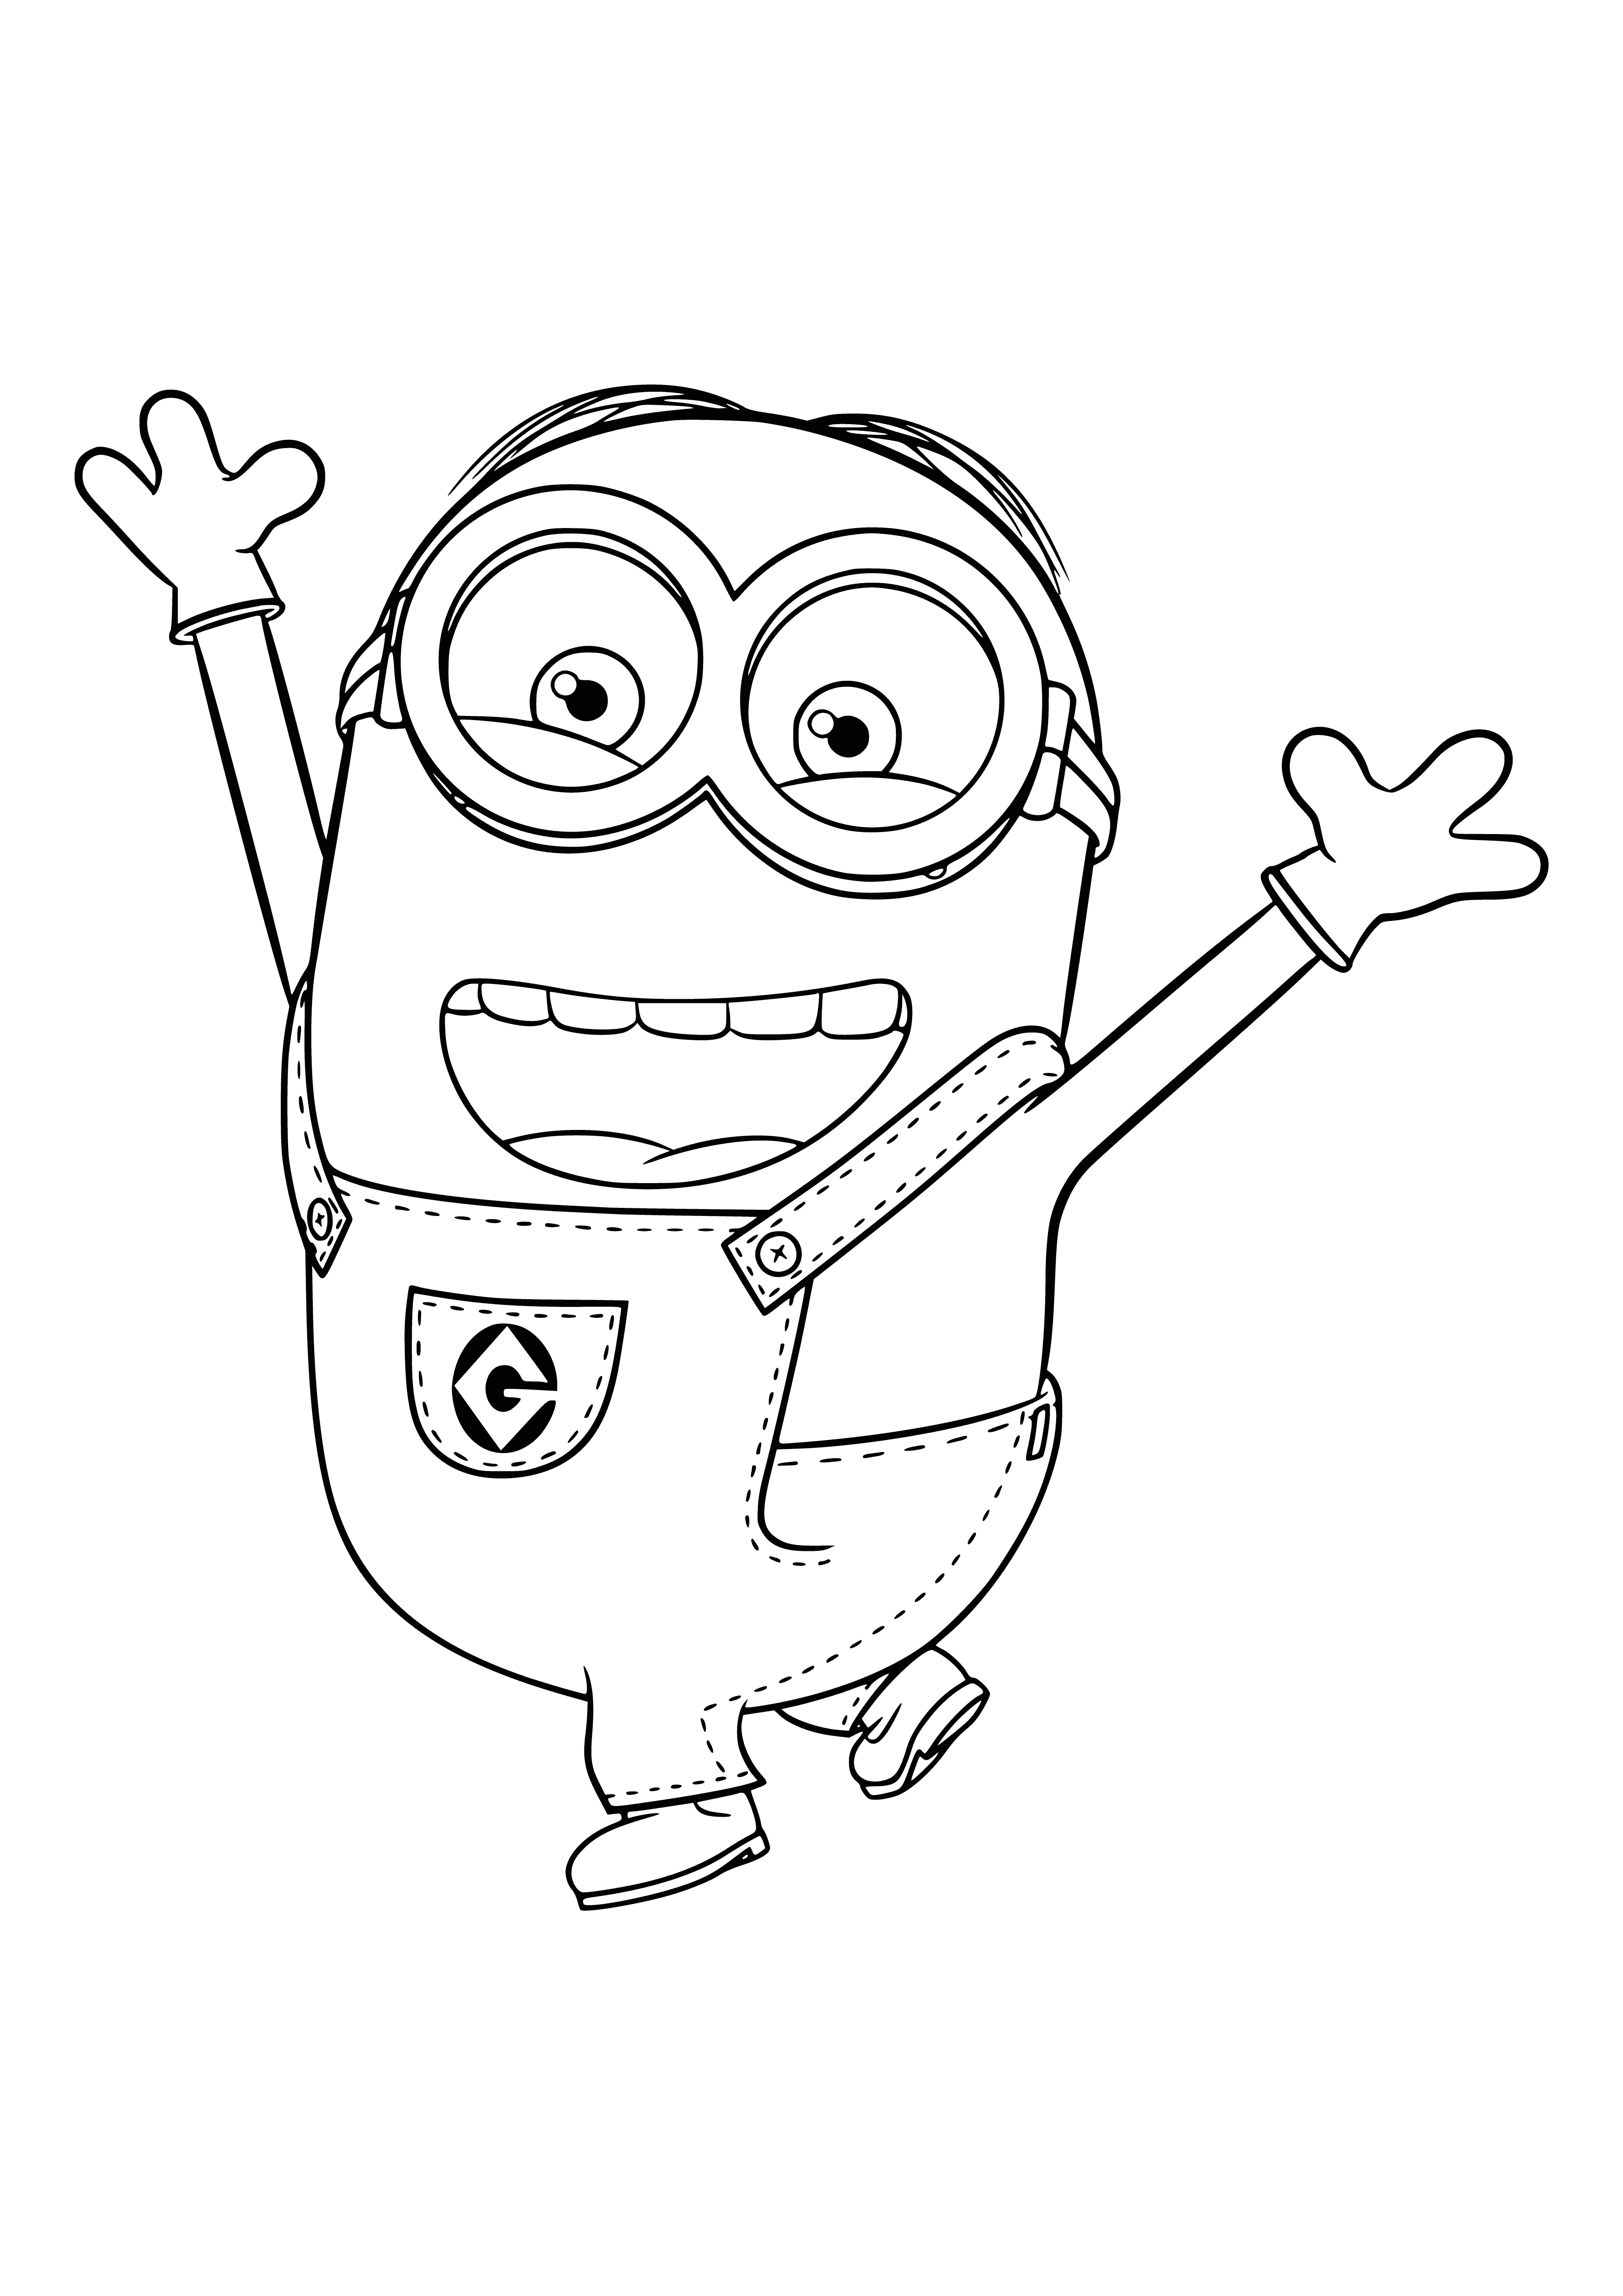 coloring page: Coloring page of Despicable Me's minion, a small yellow creature wearing blue overalls with two eyes and a big smile! #minion